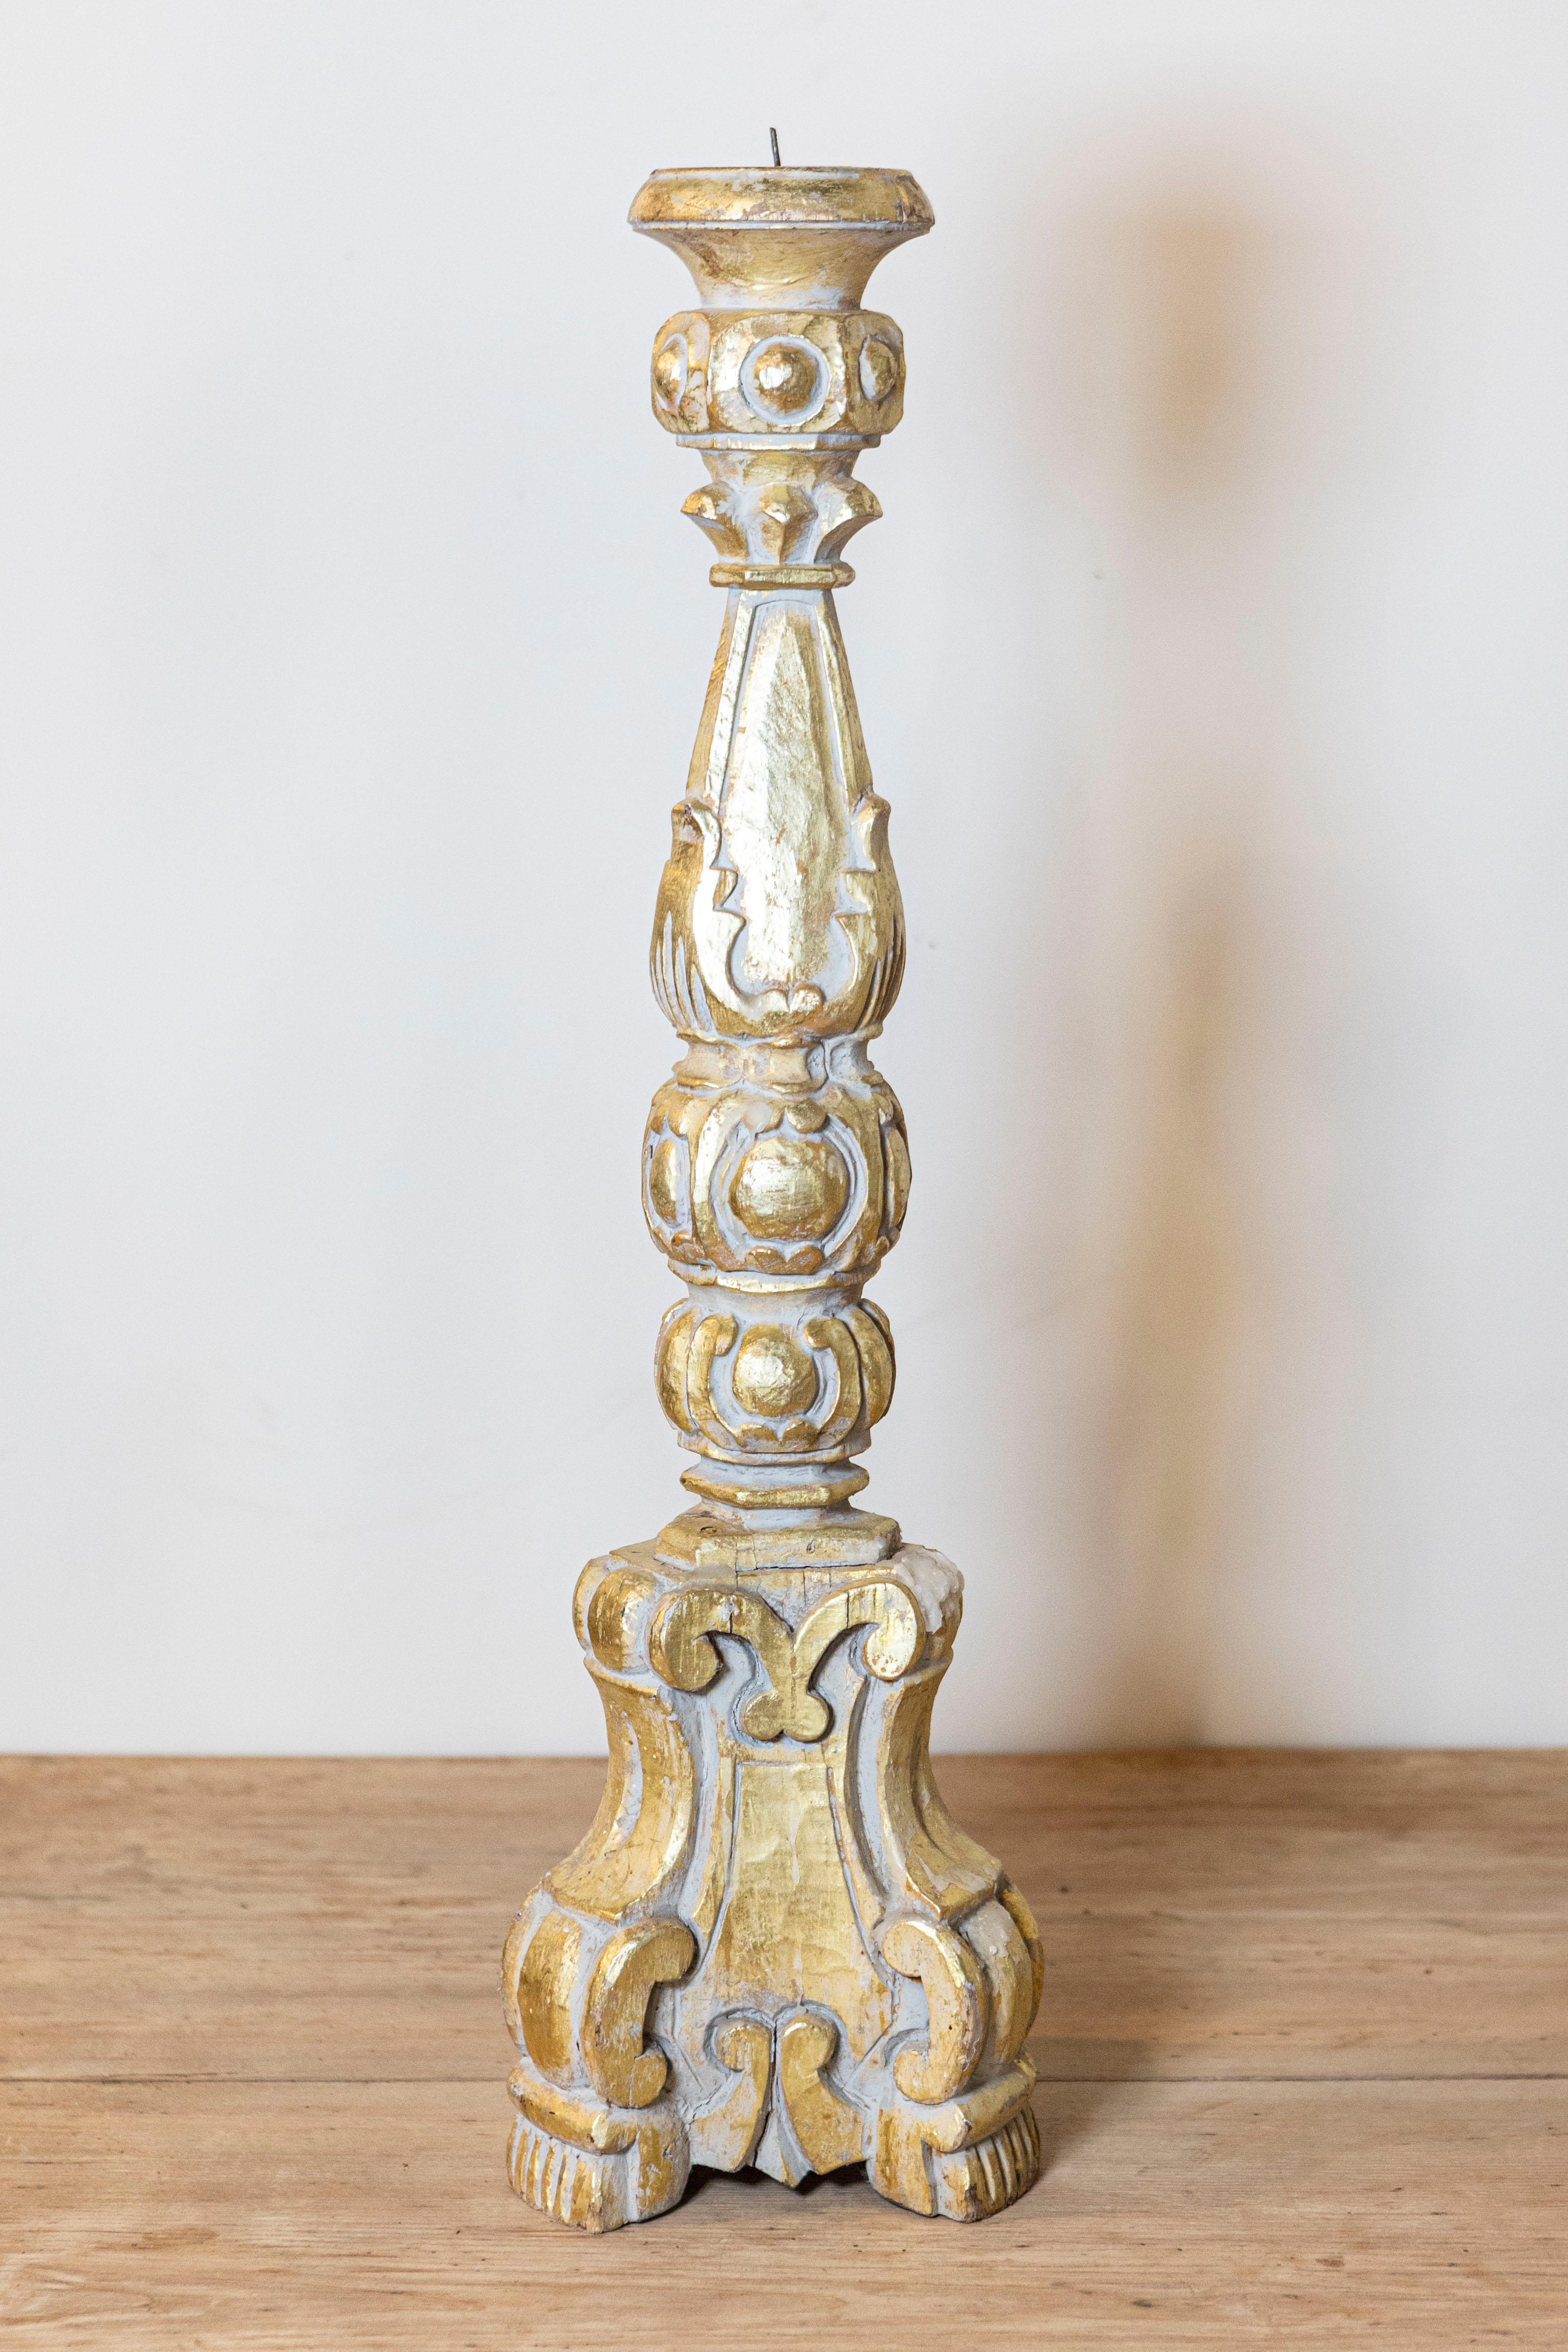 An Italian Rococo style giltwood candlestick from circa 1890 with carved scrolling décor. This Italian Rococo-style giltwood candlestick, dating back to circa 1890, exudes opulence and elegance. Its ornate design is a testament to the craftsmanship